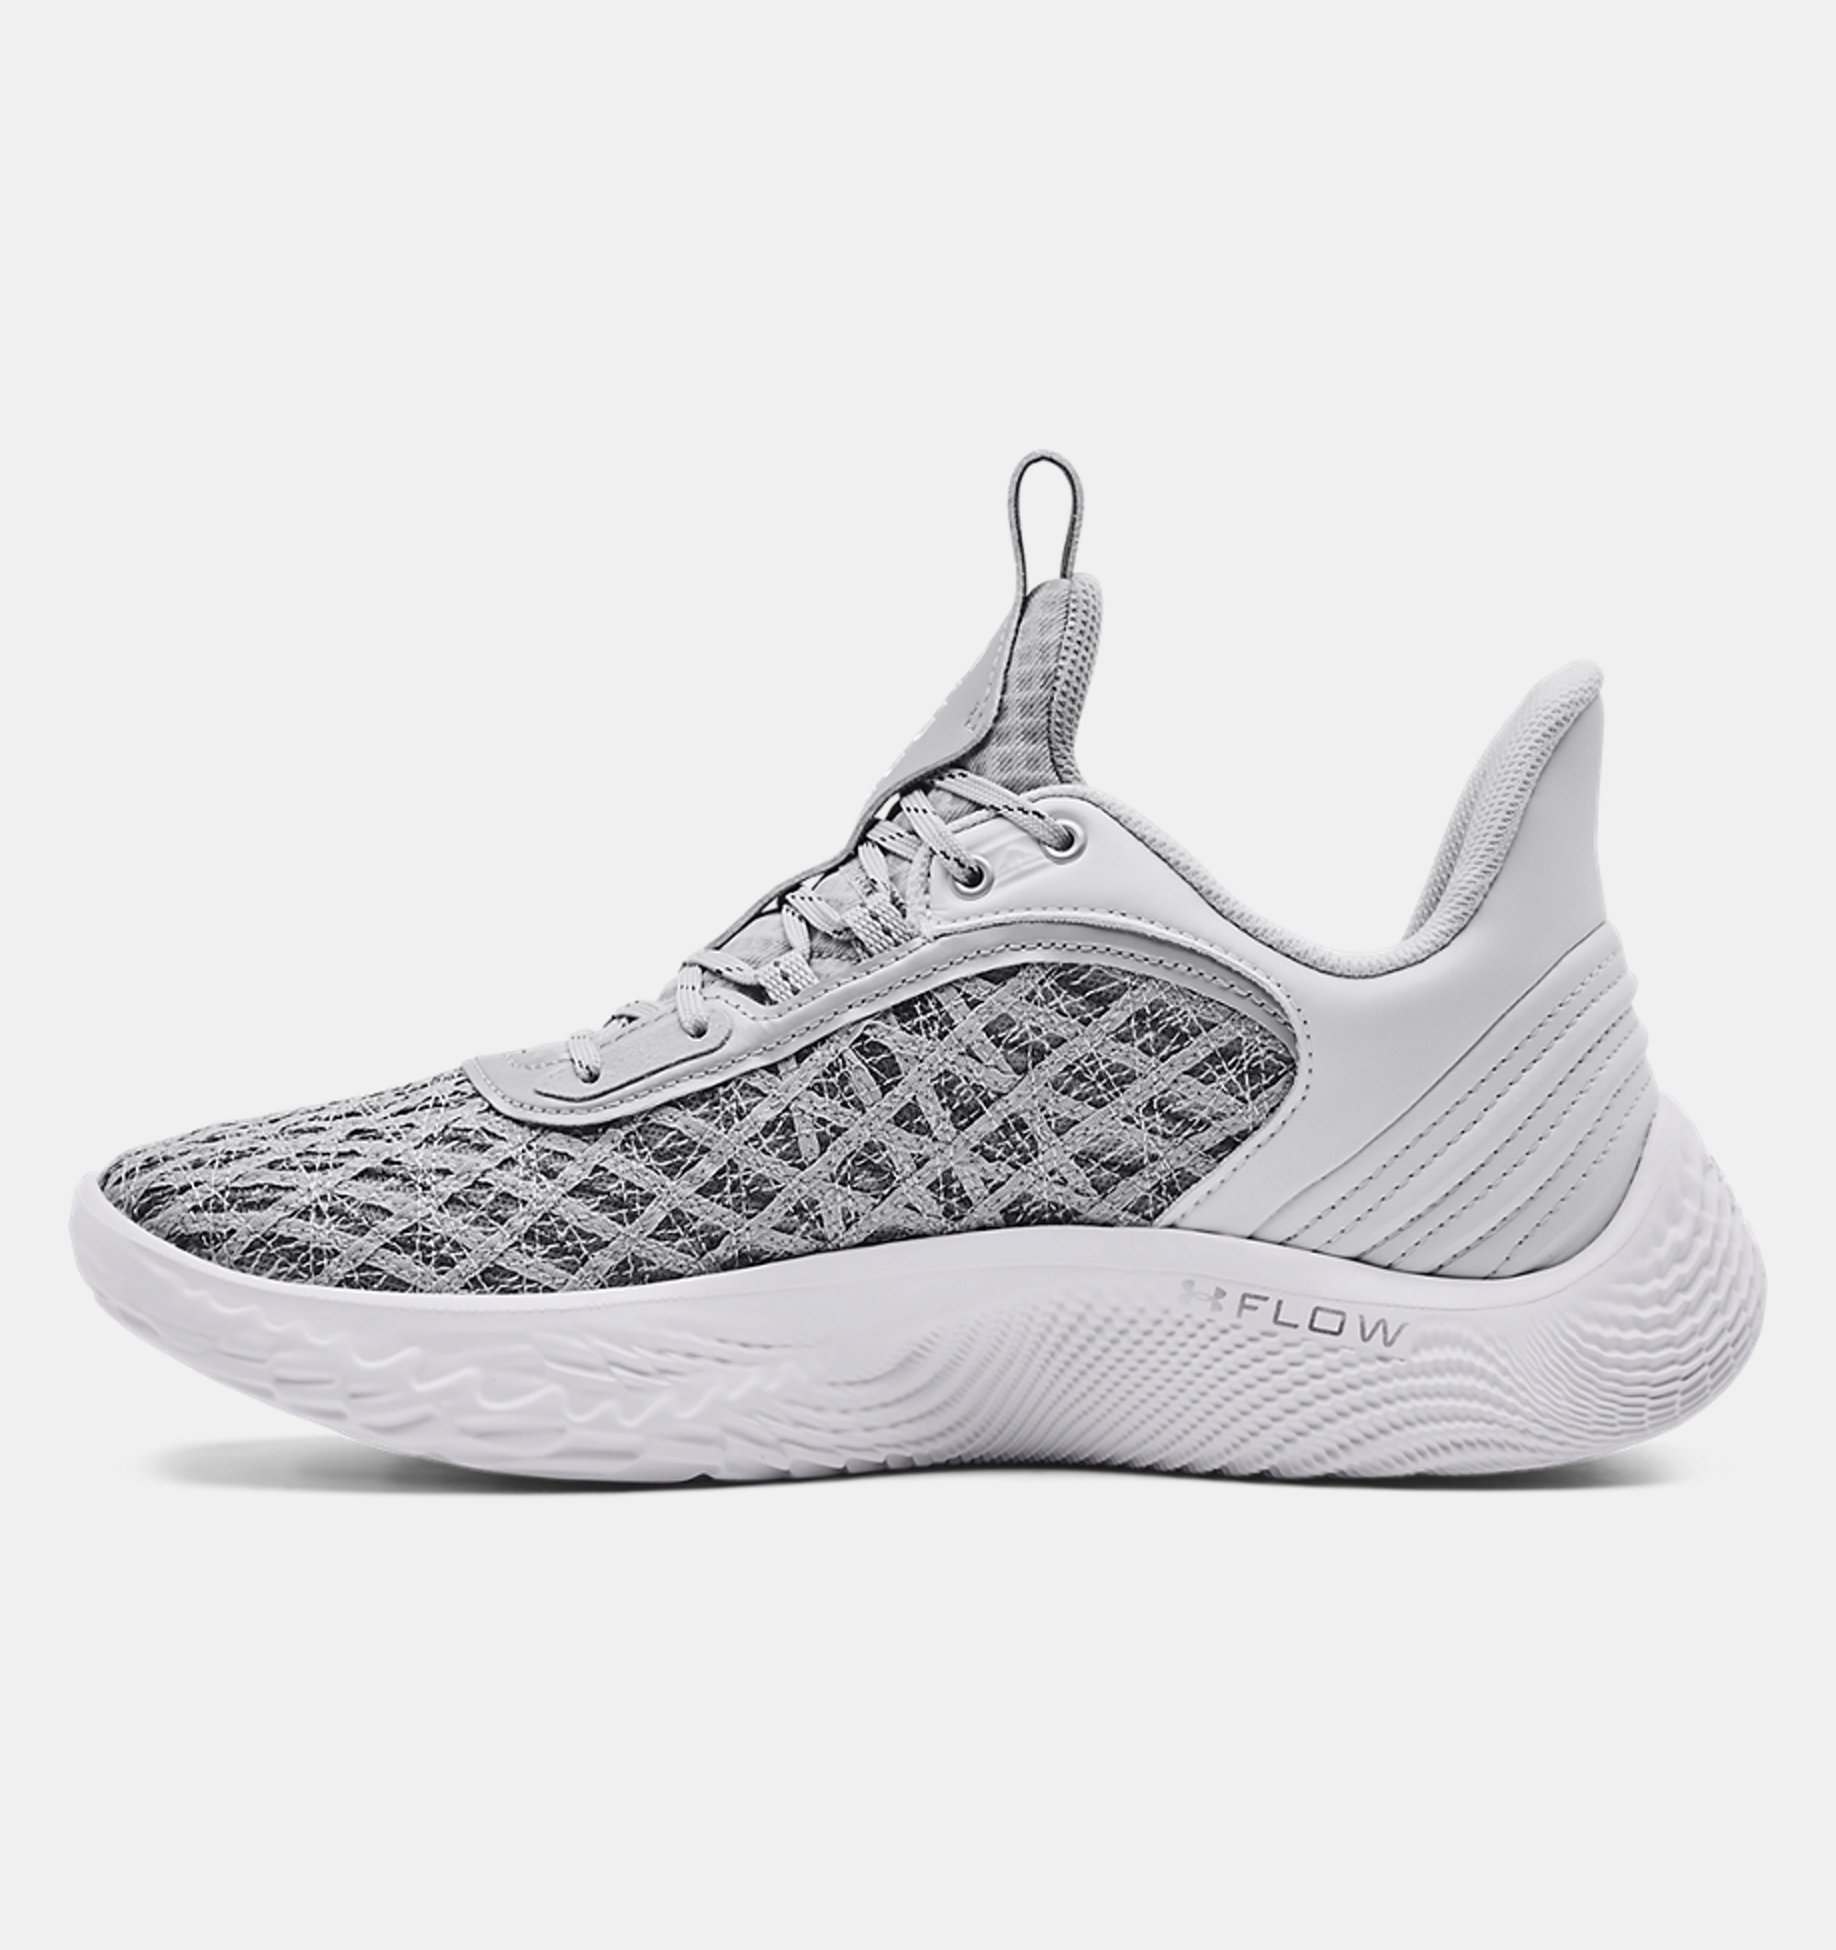 Unisex Curry Flow 9 Team Basketball Shoes | Under Armour